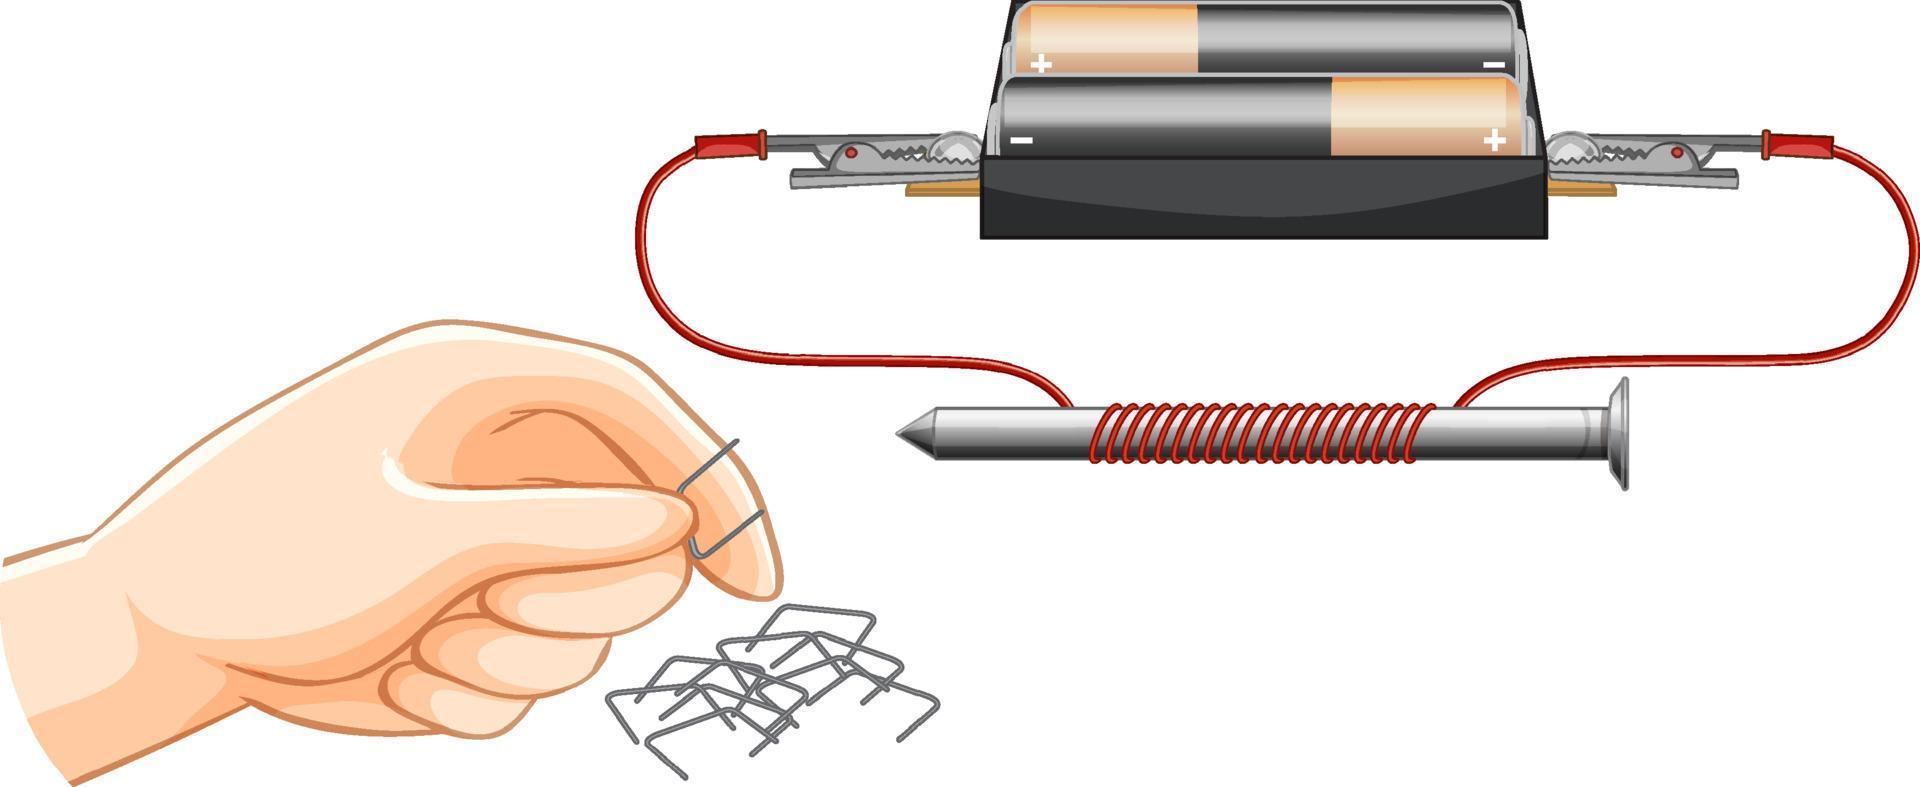 Strength of electromagnet experiment science vector